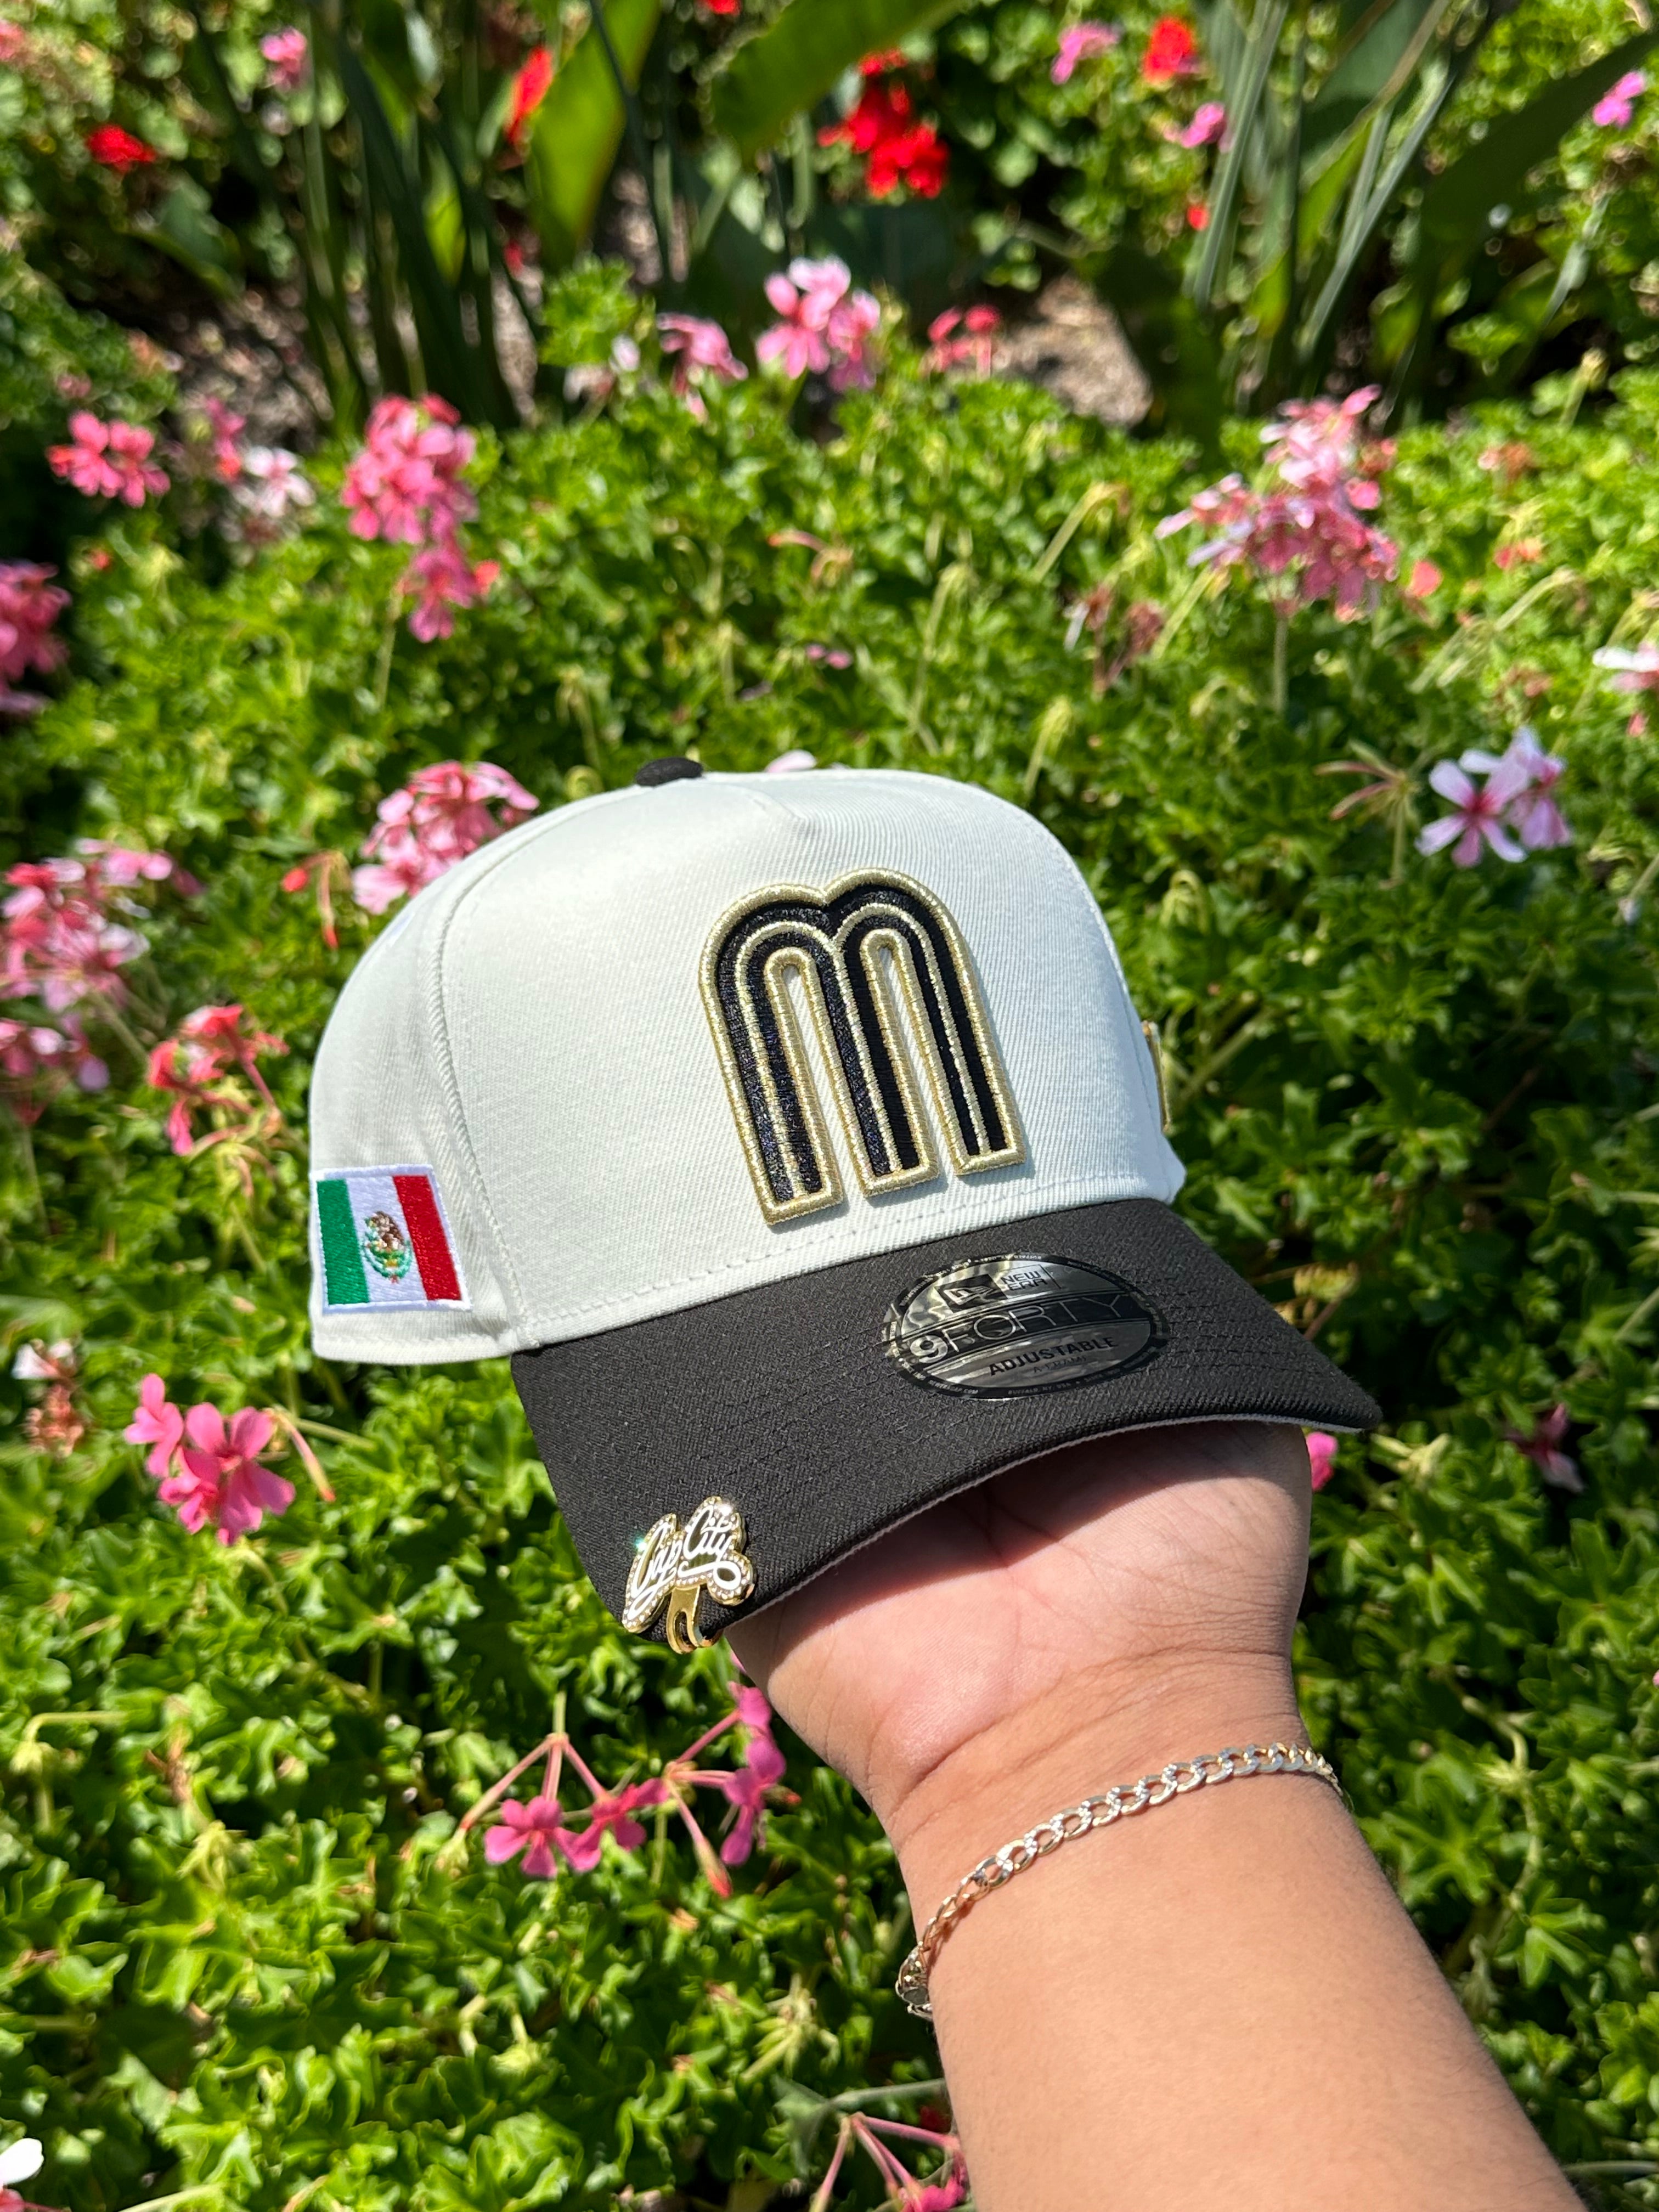 NEW ERA EXCLUSIVE 9FORTY CHROME WHITE/BLACK MEXICO A-FRAME ADJUSTABLE W/ MEXICO FLAG SIDE PATCH